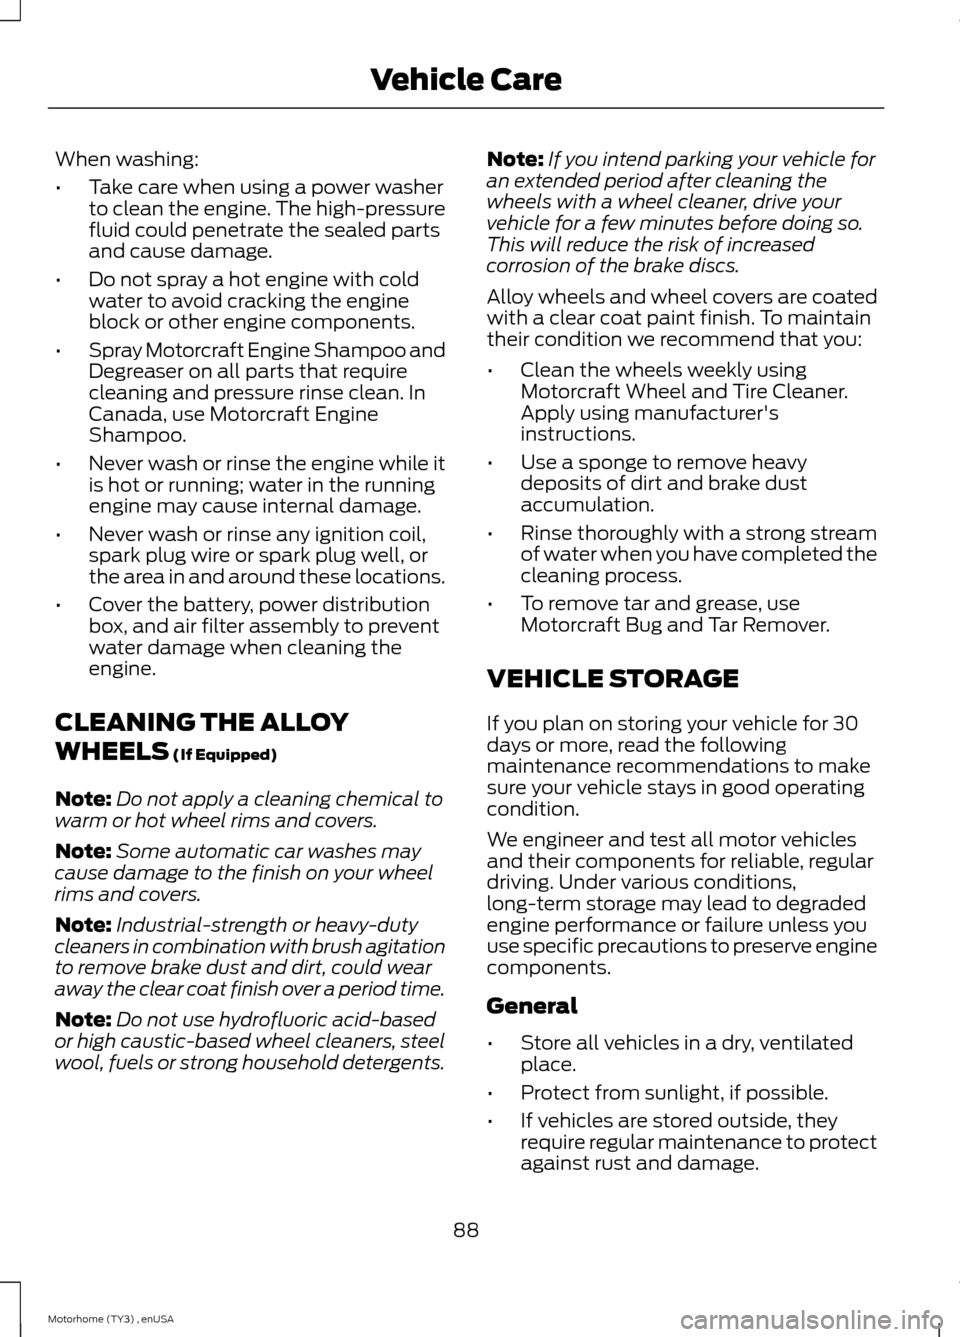 FORD F SERIES MOTORHOME AND COMMERCIAL CHASSIS 2014 12.G Owners Manual When washing:
•Take care when using a power washerto clean the engine. The high-pressurefluid could penetrate the sealed partsand cause damage.
•Do not spray a hot engine with coldwater to avoid c